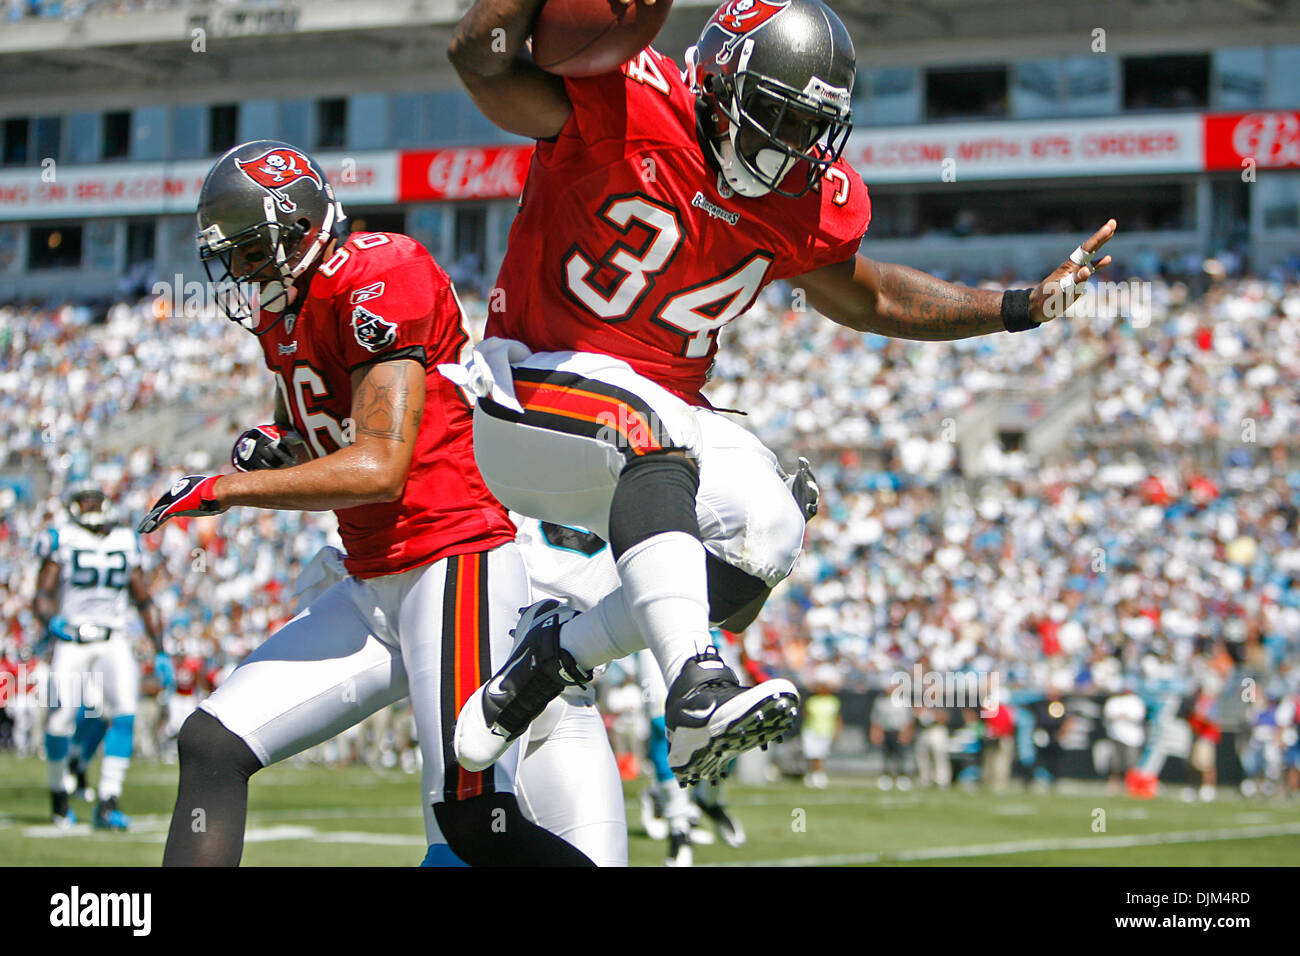 Sept. 19, 2010 - Charlotte, North Carolina, U.S. - Tampa Bay Buccaneers running back EARNEST GRAHAM (34) jumps into the endzone past teammate JERRAMY STEVENS (86) to score a first quarter touch down against the Charlotte Panthers at Bank of America Stadium. (Credit Image: © Chris Zuppa/St. Petersburg Times/ZUMApress.com) Stock Photo